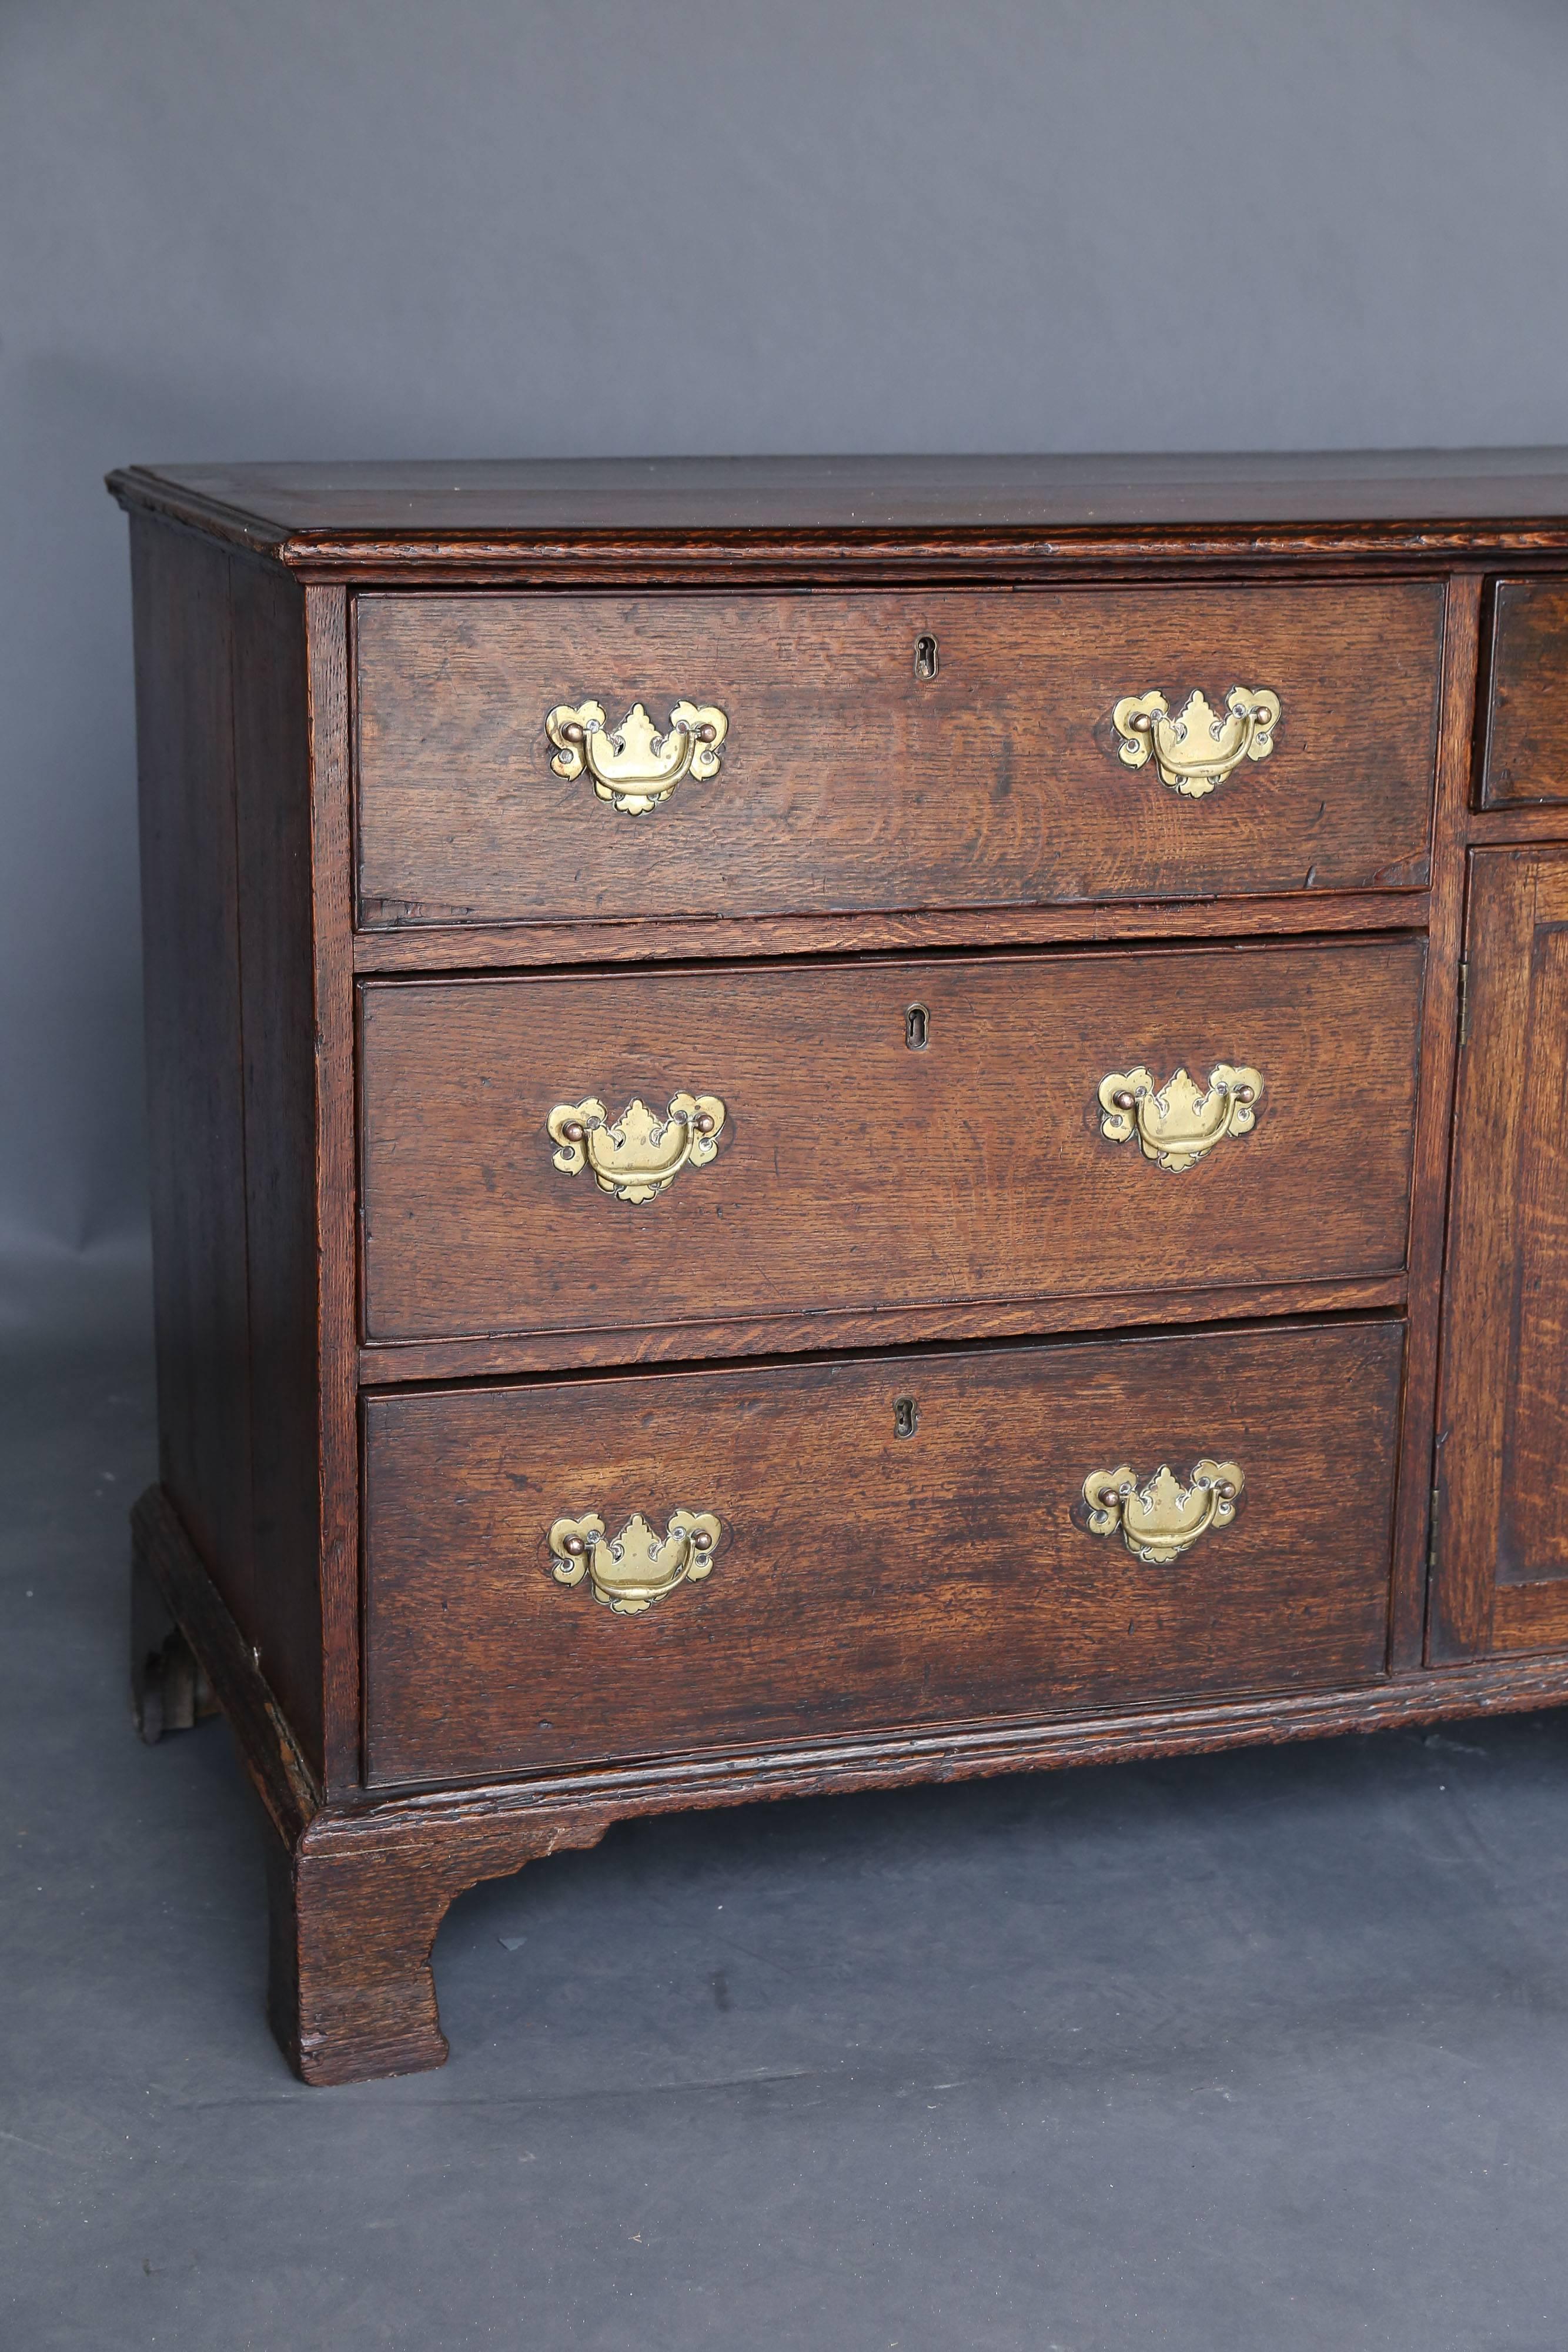 An early George III oak dresser base of superb color and proportions. Seven drawers and a two-door cabinet. Bracket feet at ends and one in the center, circa 1760.